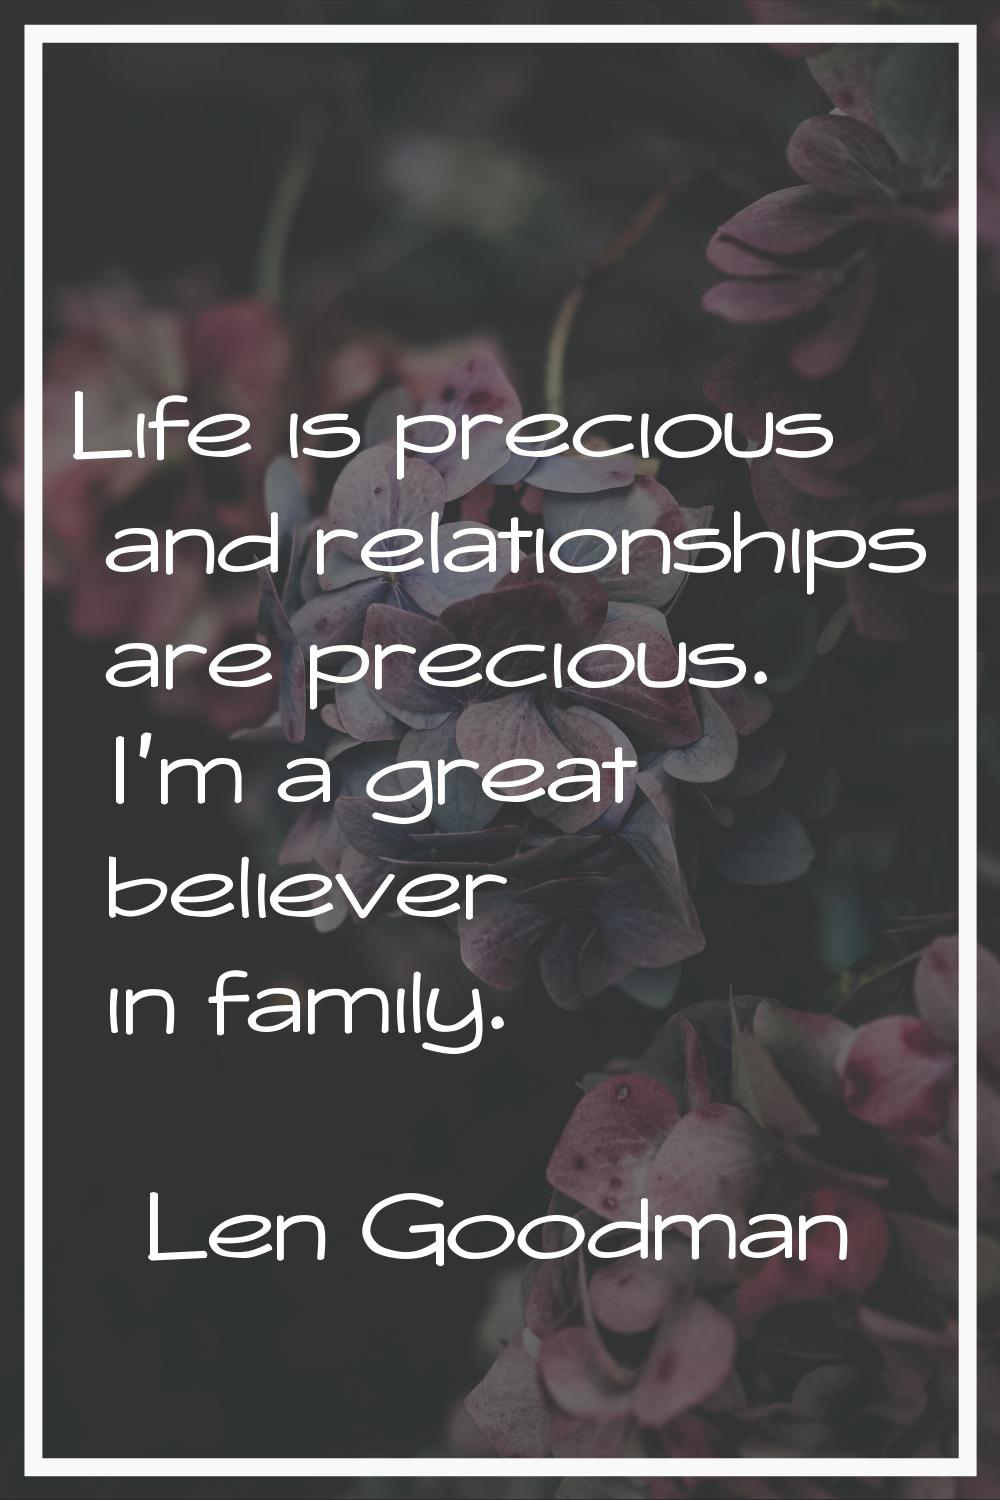 Life is precious and relationships are precious. I'm a great believer in family.